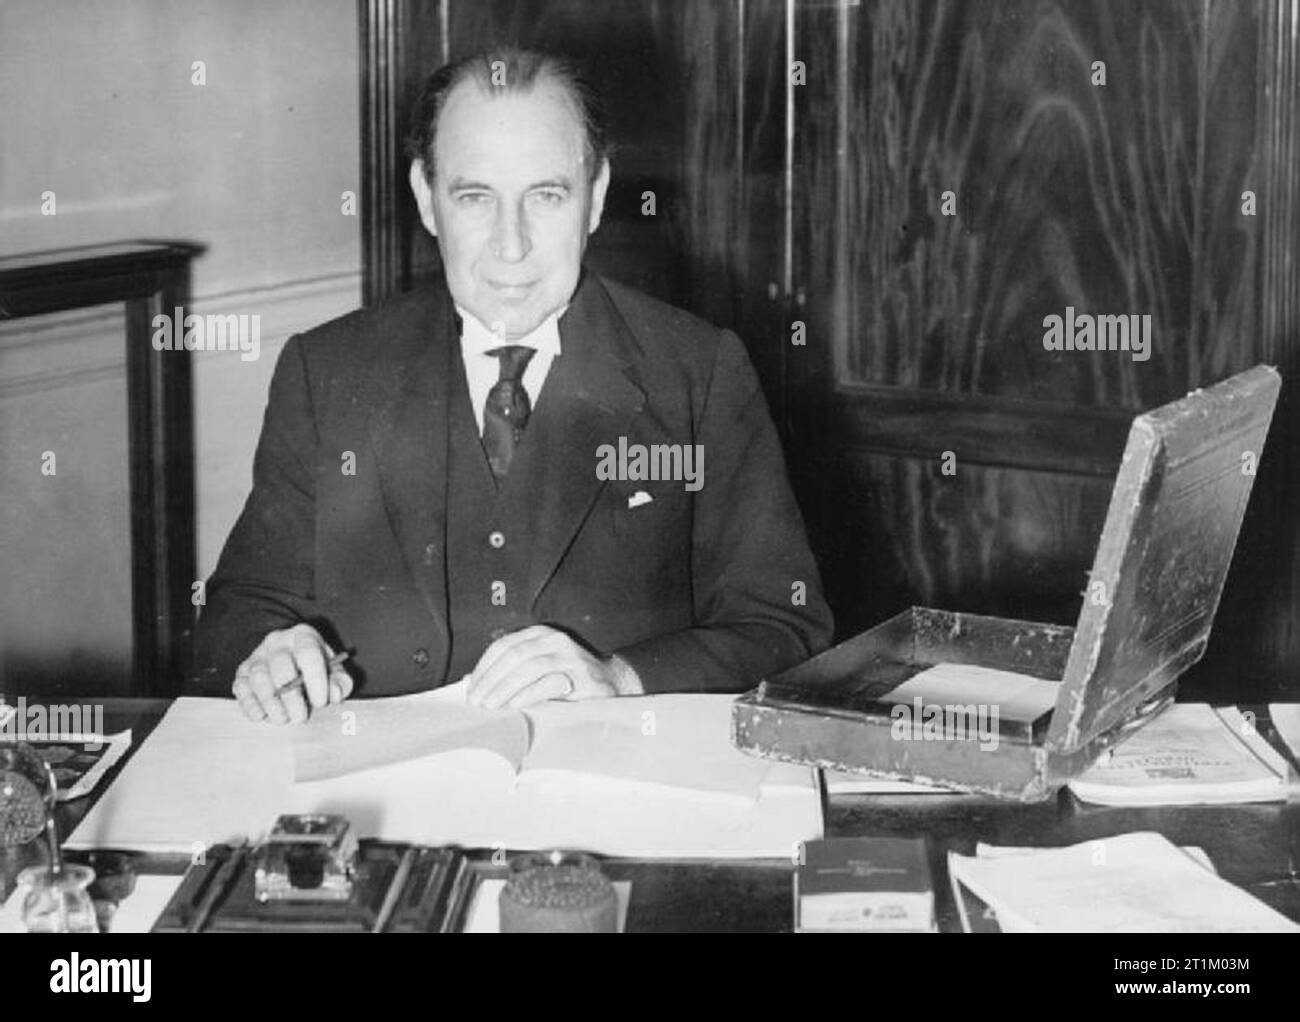 British Political Personalities 1936-1945 The Churchill Coalition Government 11 May 1940 - 23 May 1945: Sir John Anderson, the Chancellor of the Exchequer, seated at his desk at the Treasury, the day before he presented the budget. Stock Photo